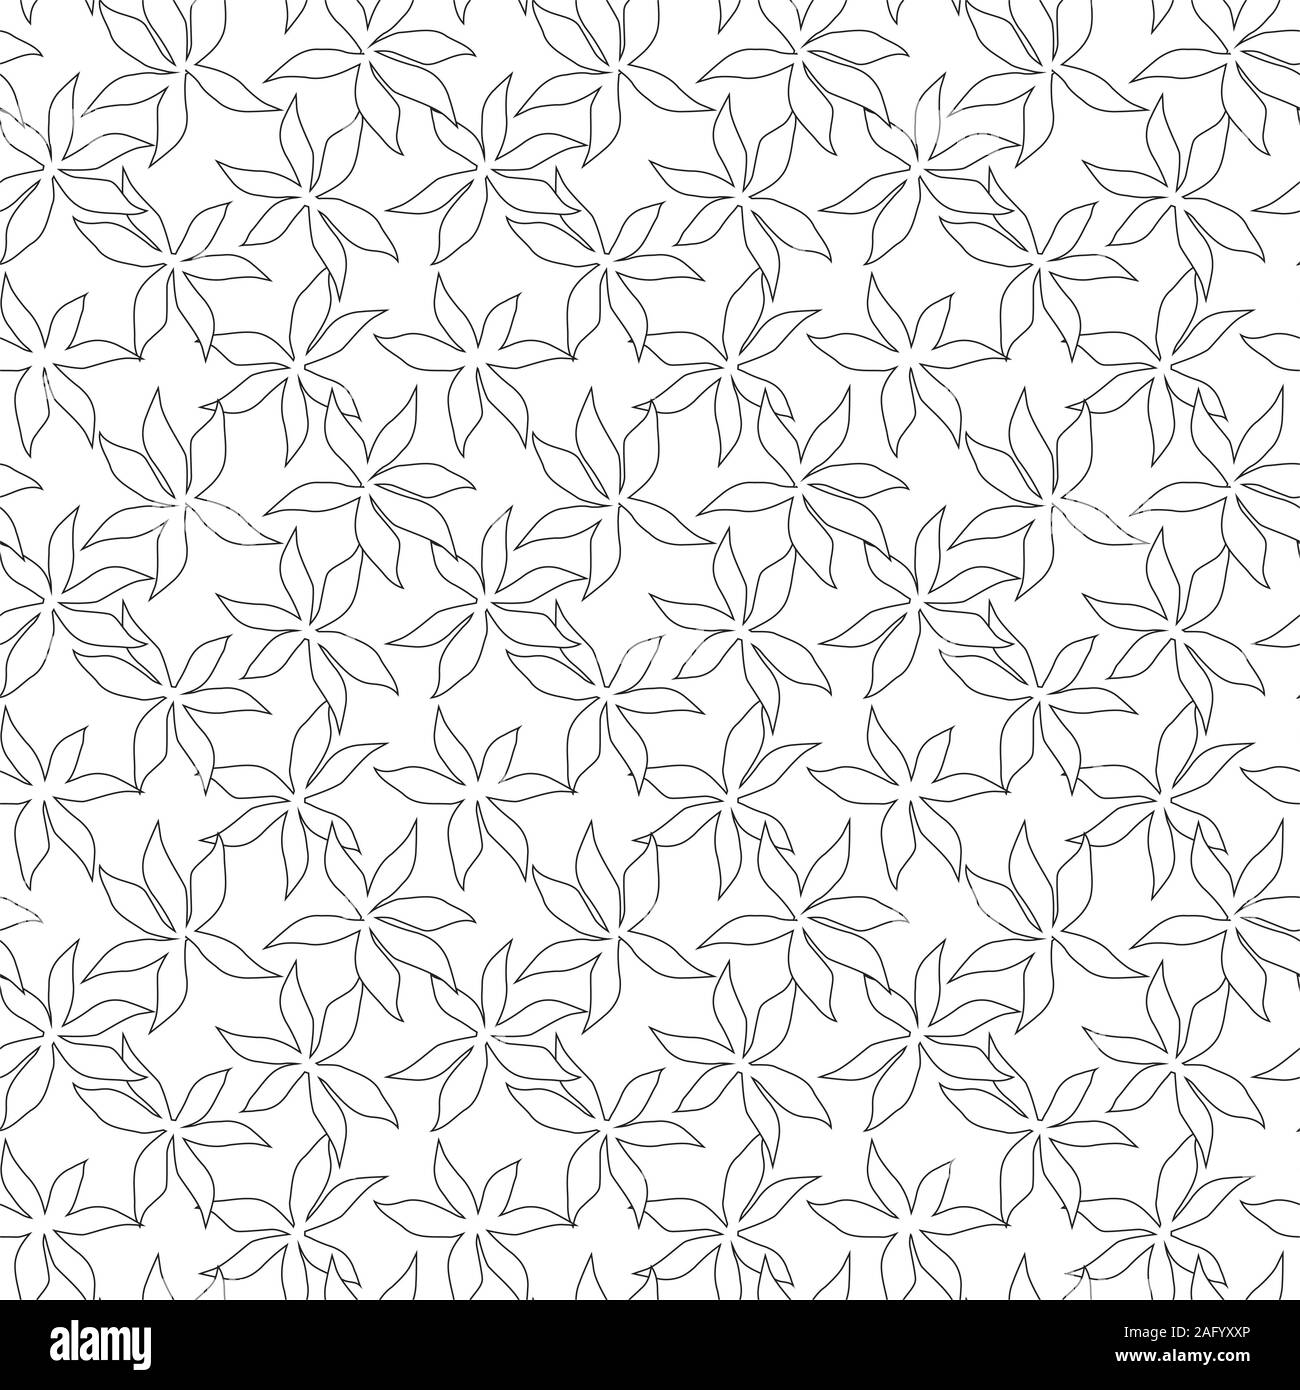 It is a tropical floral pattern suitable for fashion prints, patterns, backgrounds, websites, wallpaper, crafts Stock Photo